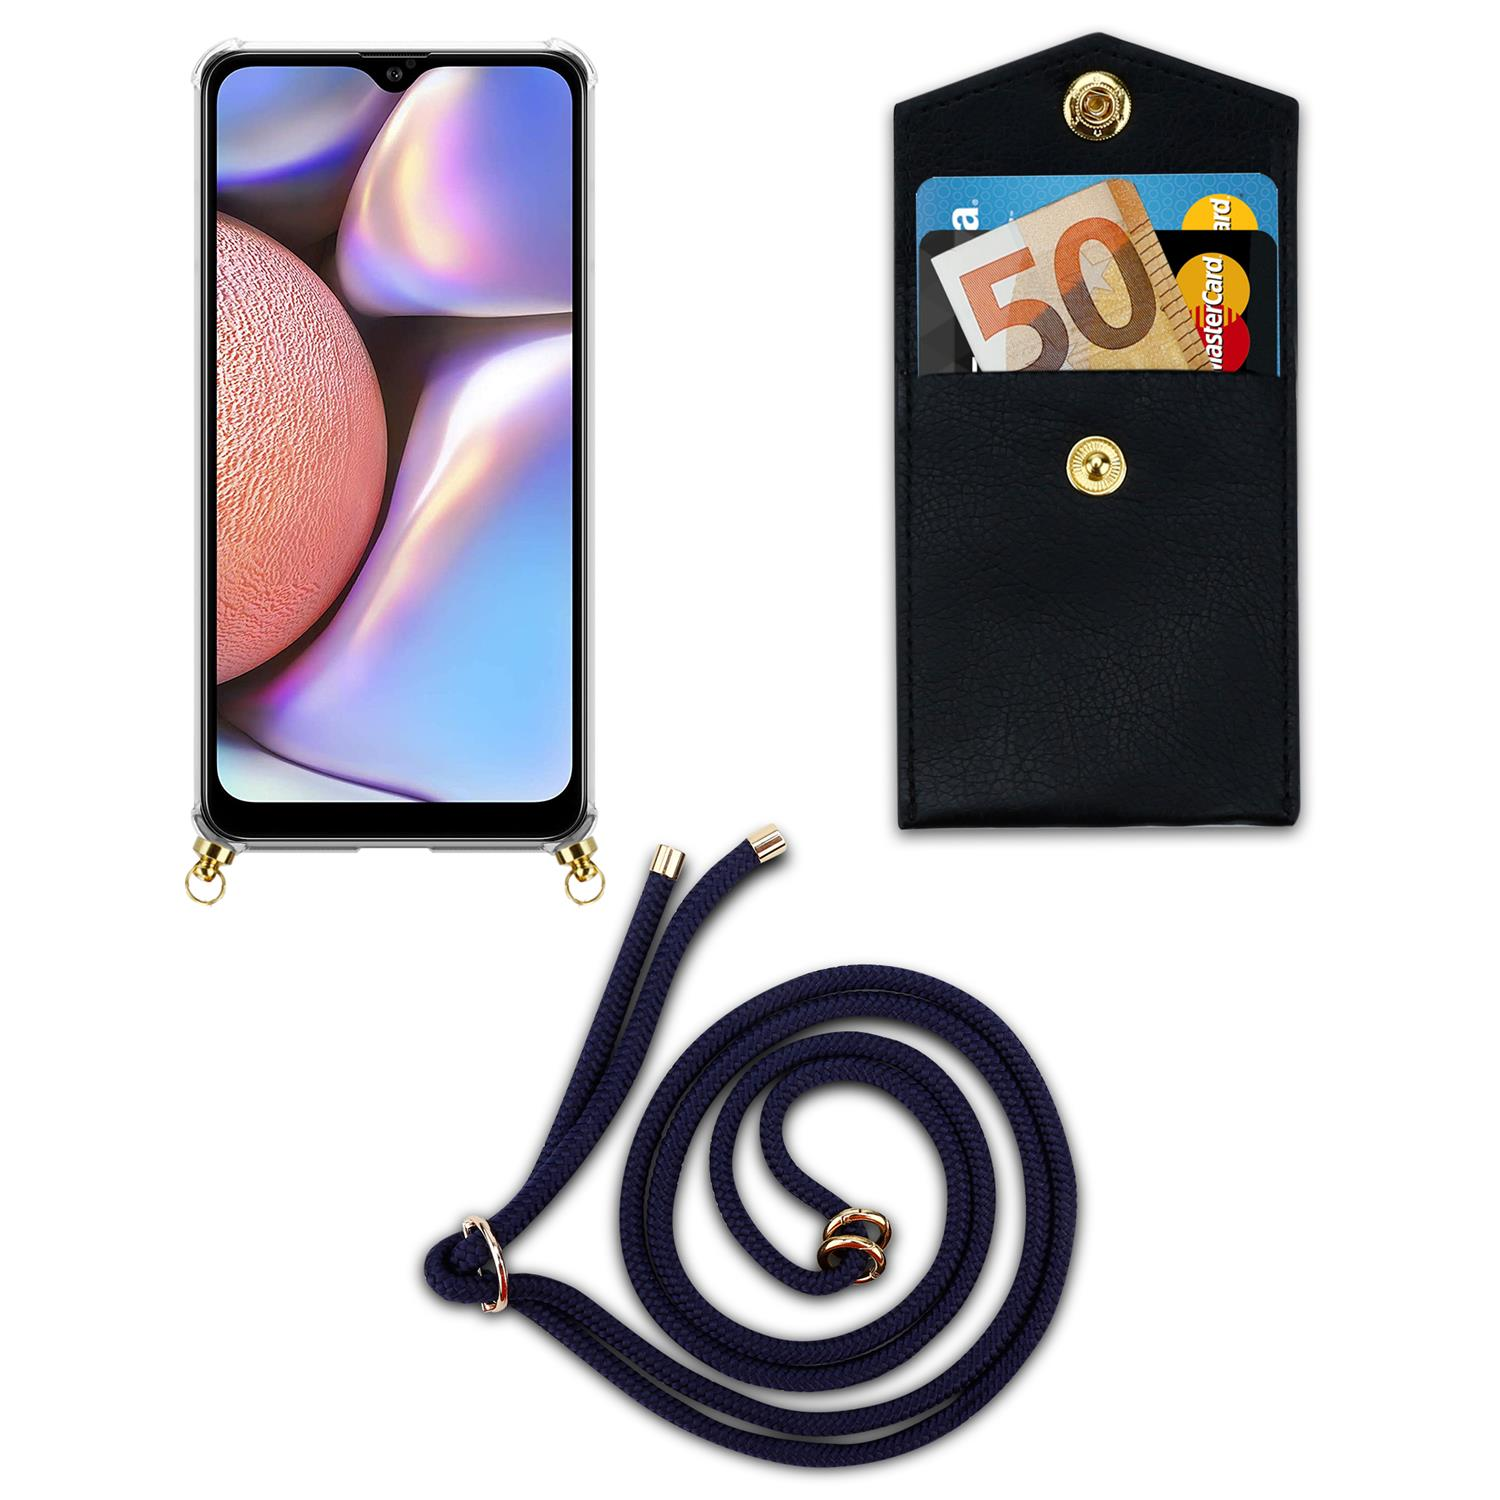 CADORABO Handy Kette mit Backcover, BLAU Samsung, Kordel und A10s M01s, Ringen, abnehmbarer Galaxy TIEF Hülle, Gold / Band